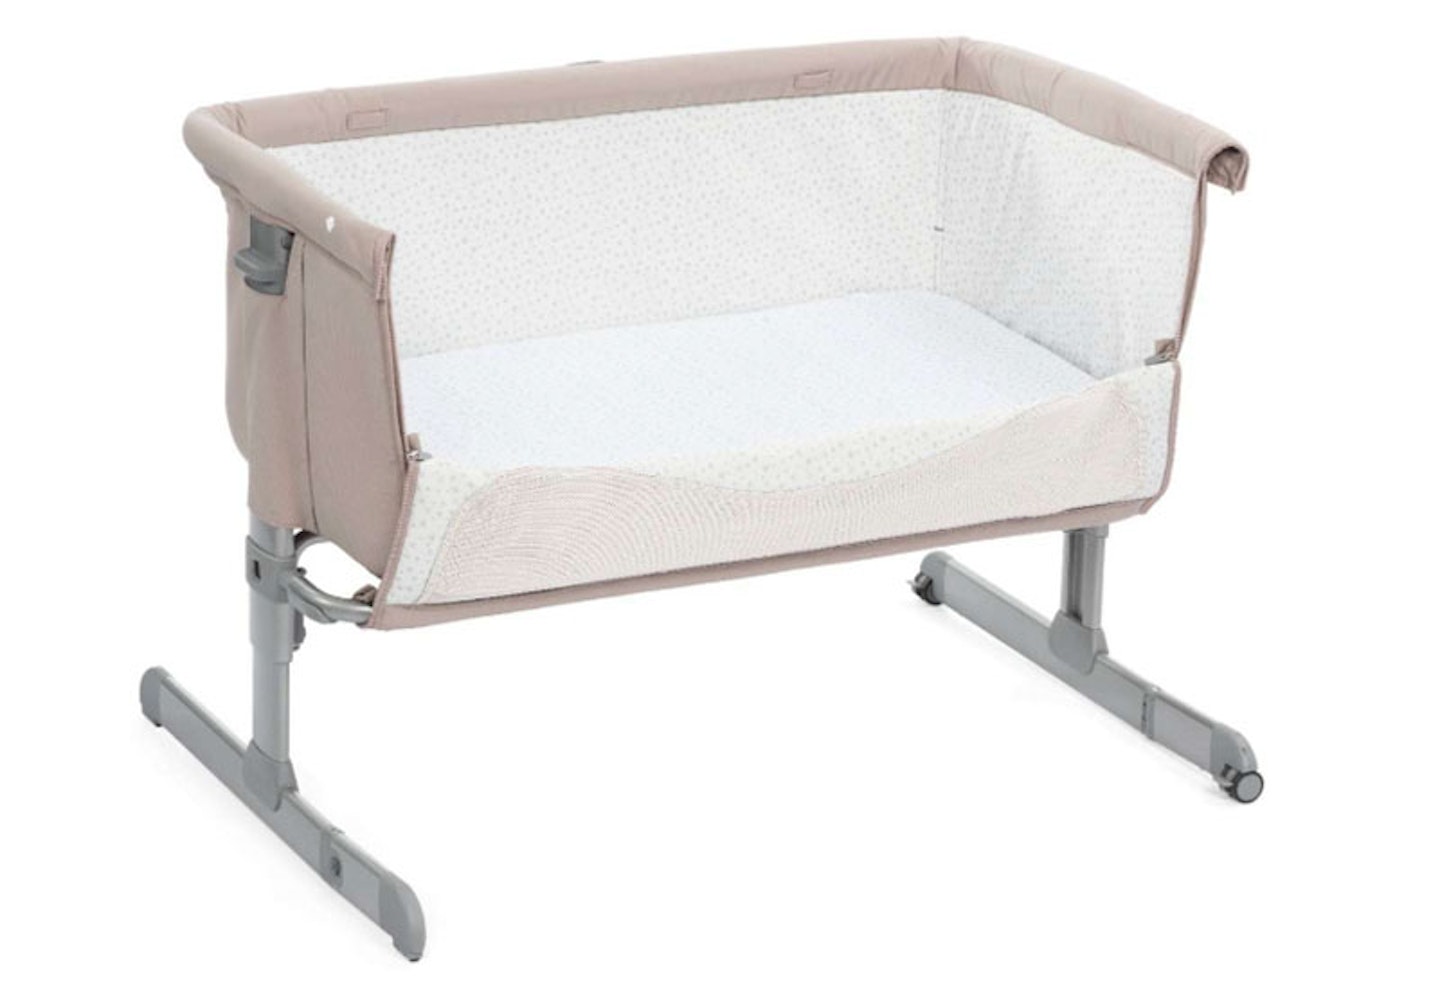 Chicco Next2Me Bedside Crib, Reviews